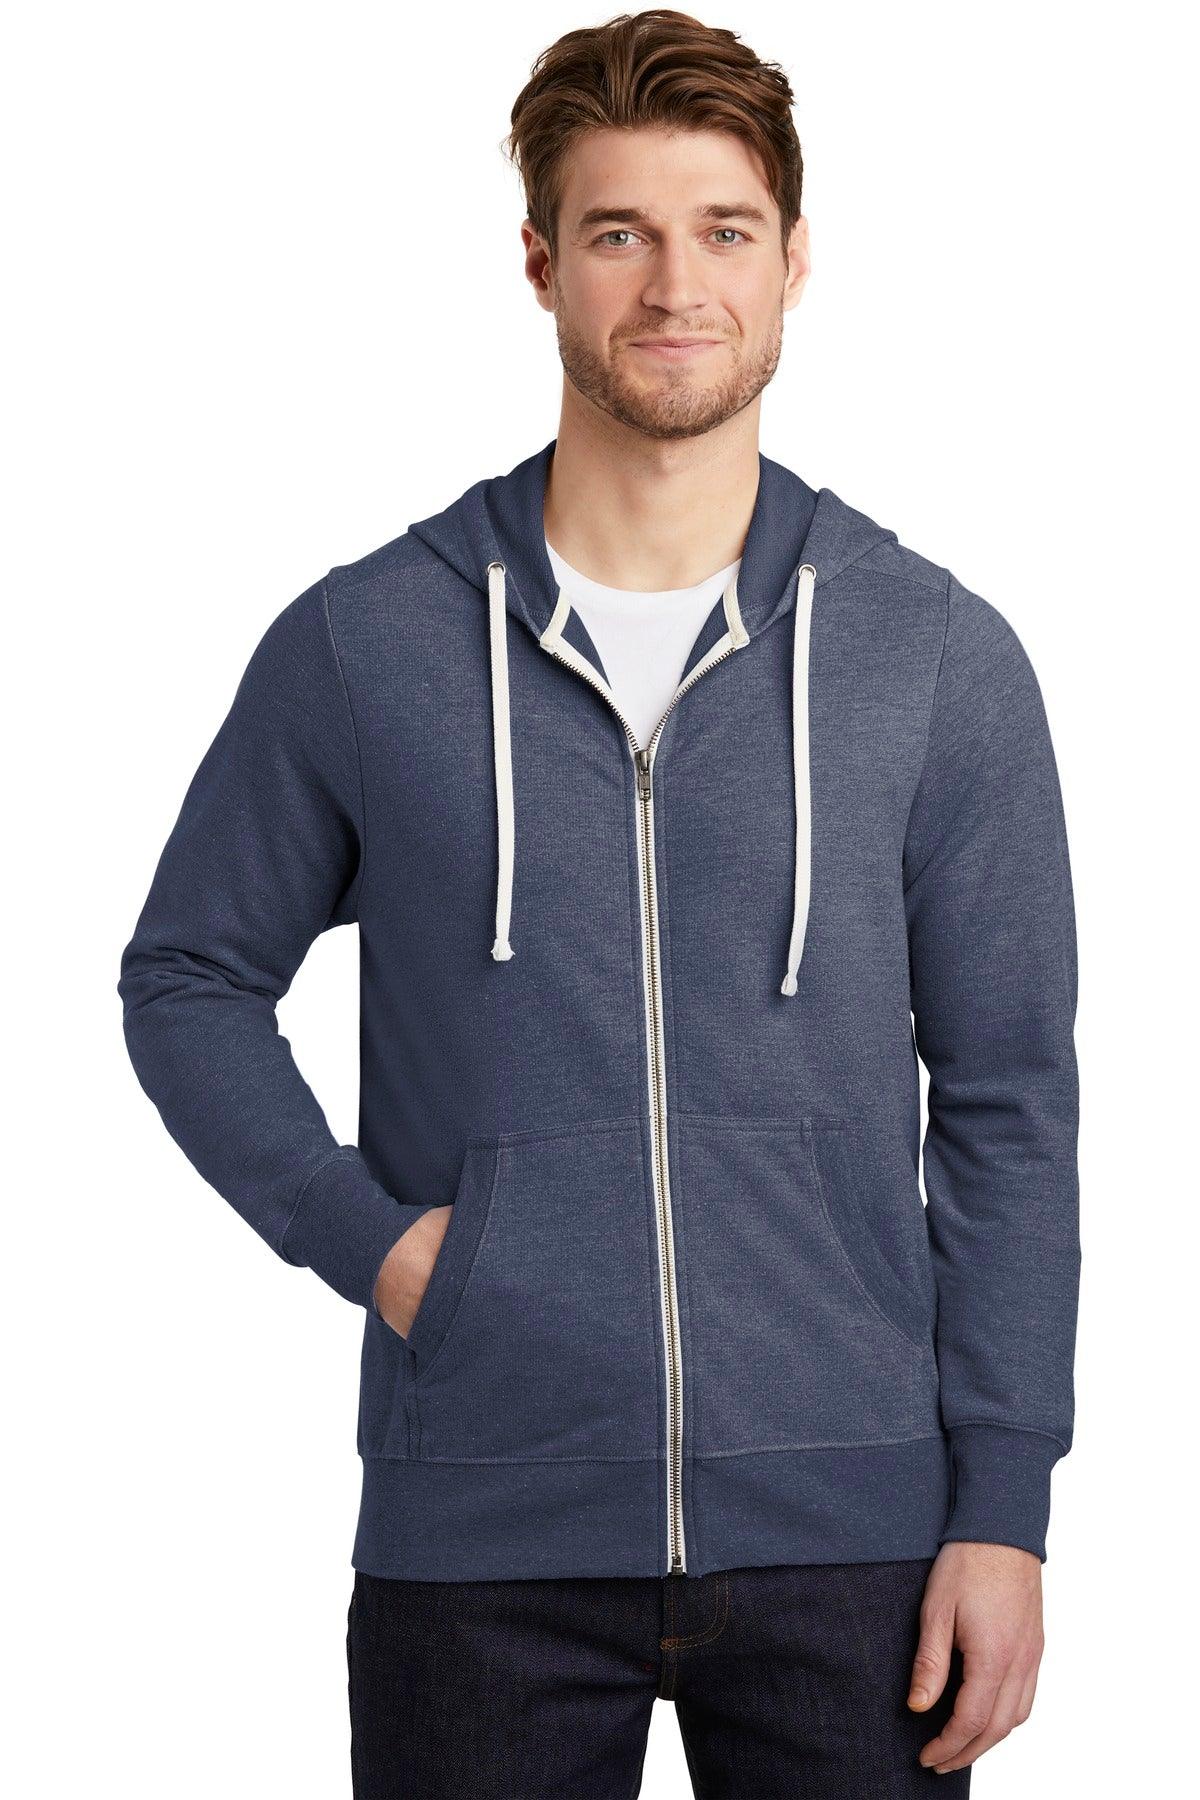 District Perfect Tri French Terry Full-Zip Hoodie. DT356 - Dresses Max